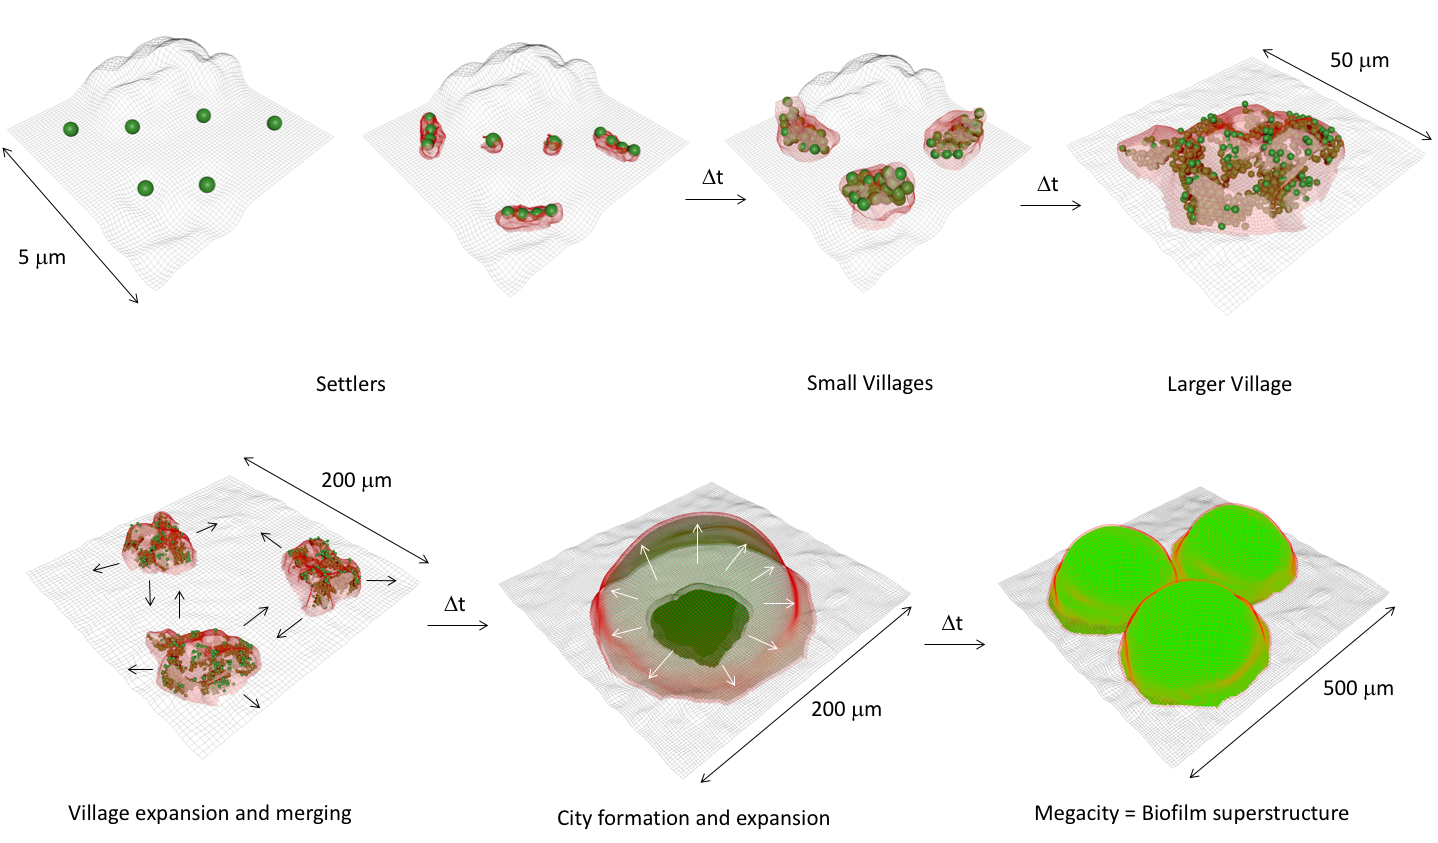 Images of bacteria growing from individual colonies to large biofilms, using the analogy of cities growing from settlers to megacities